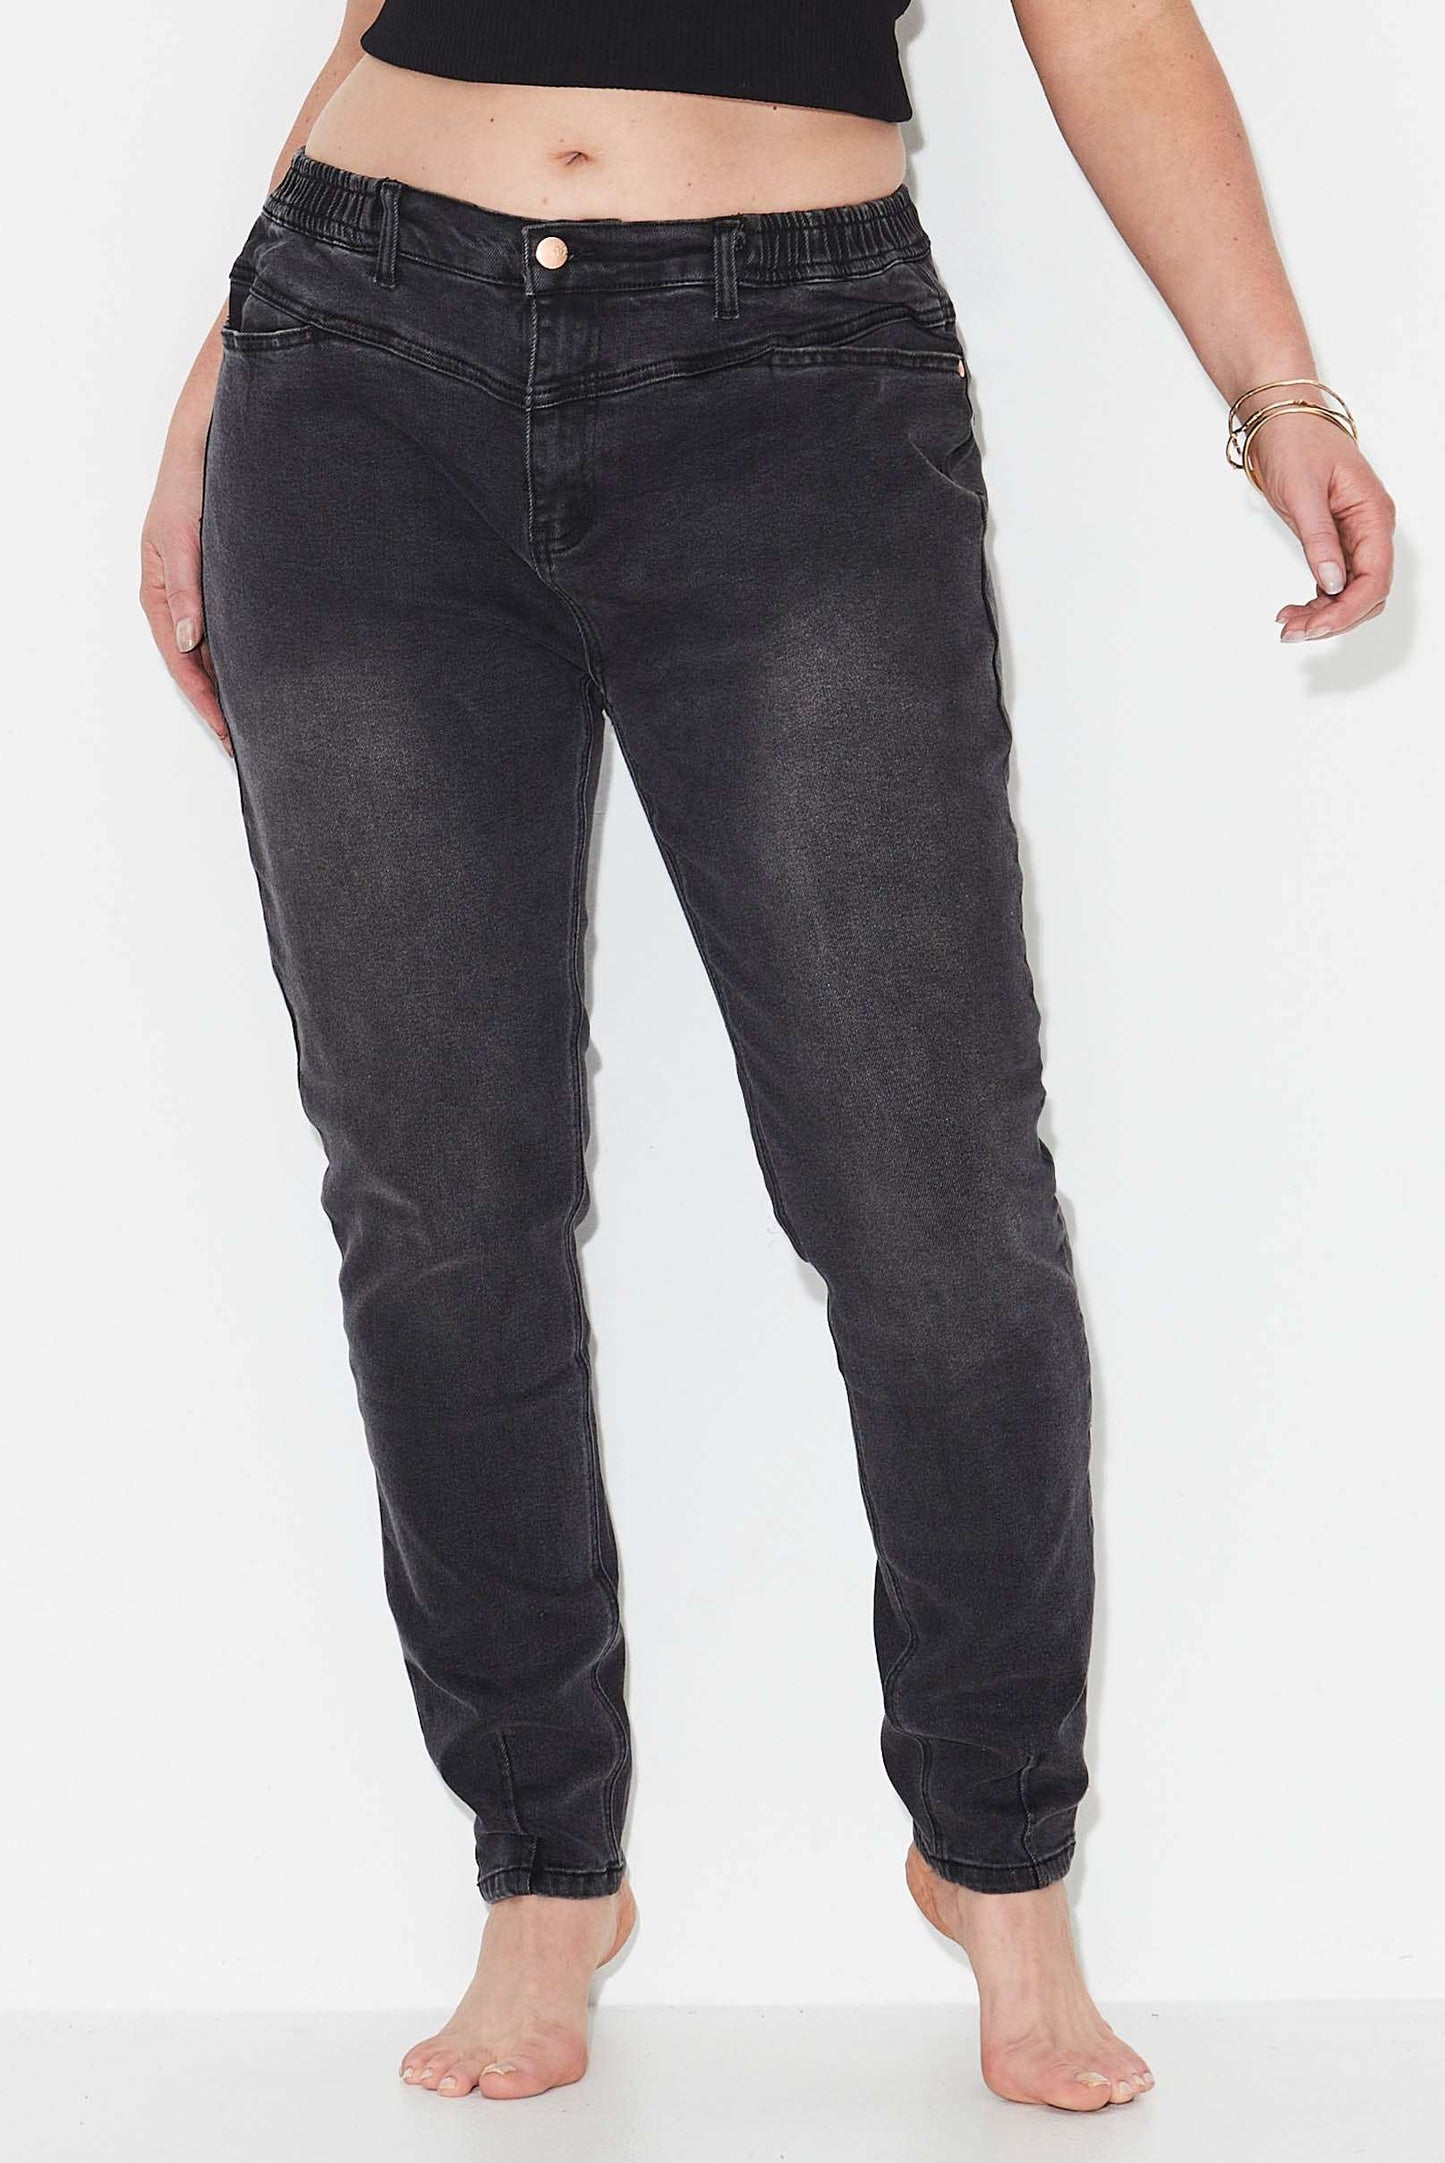 DRIVERS - Yoke Detail Tapered Jeans - Grey Wash